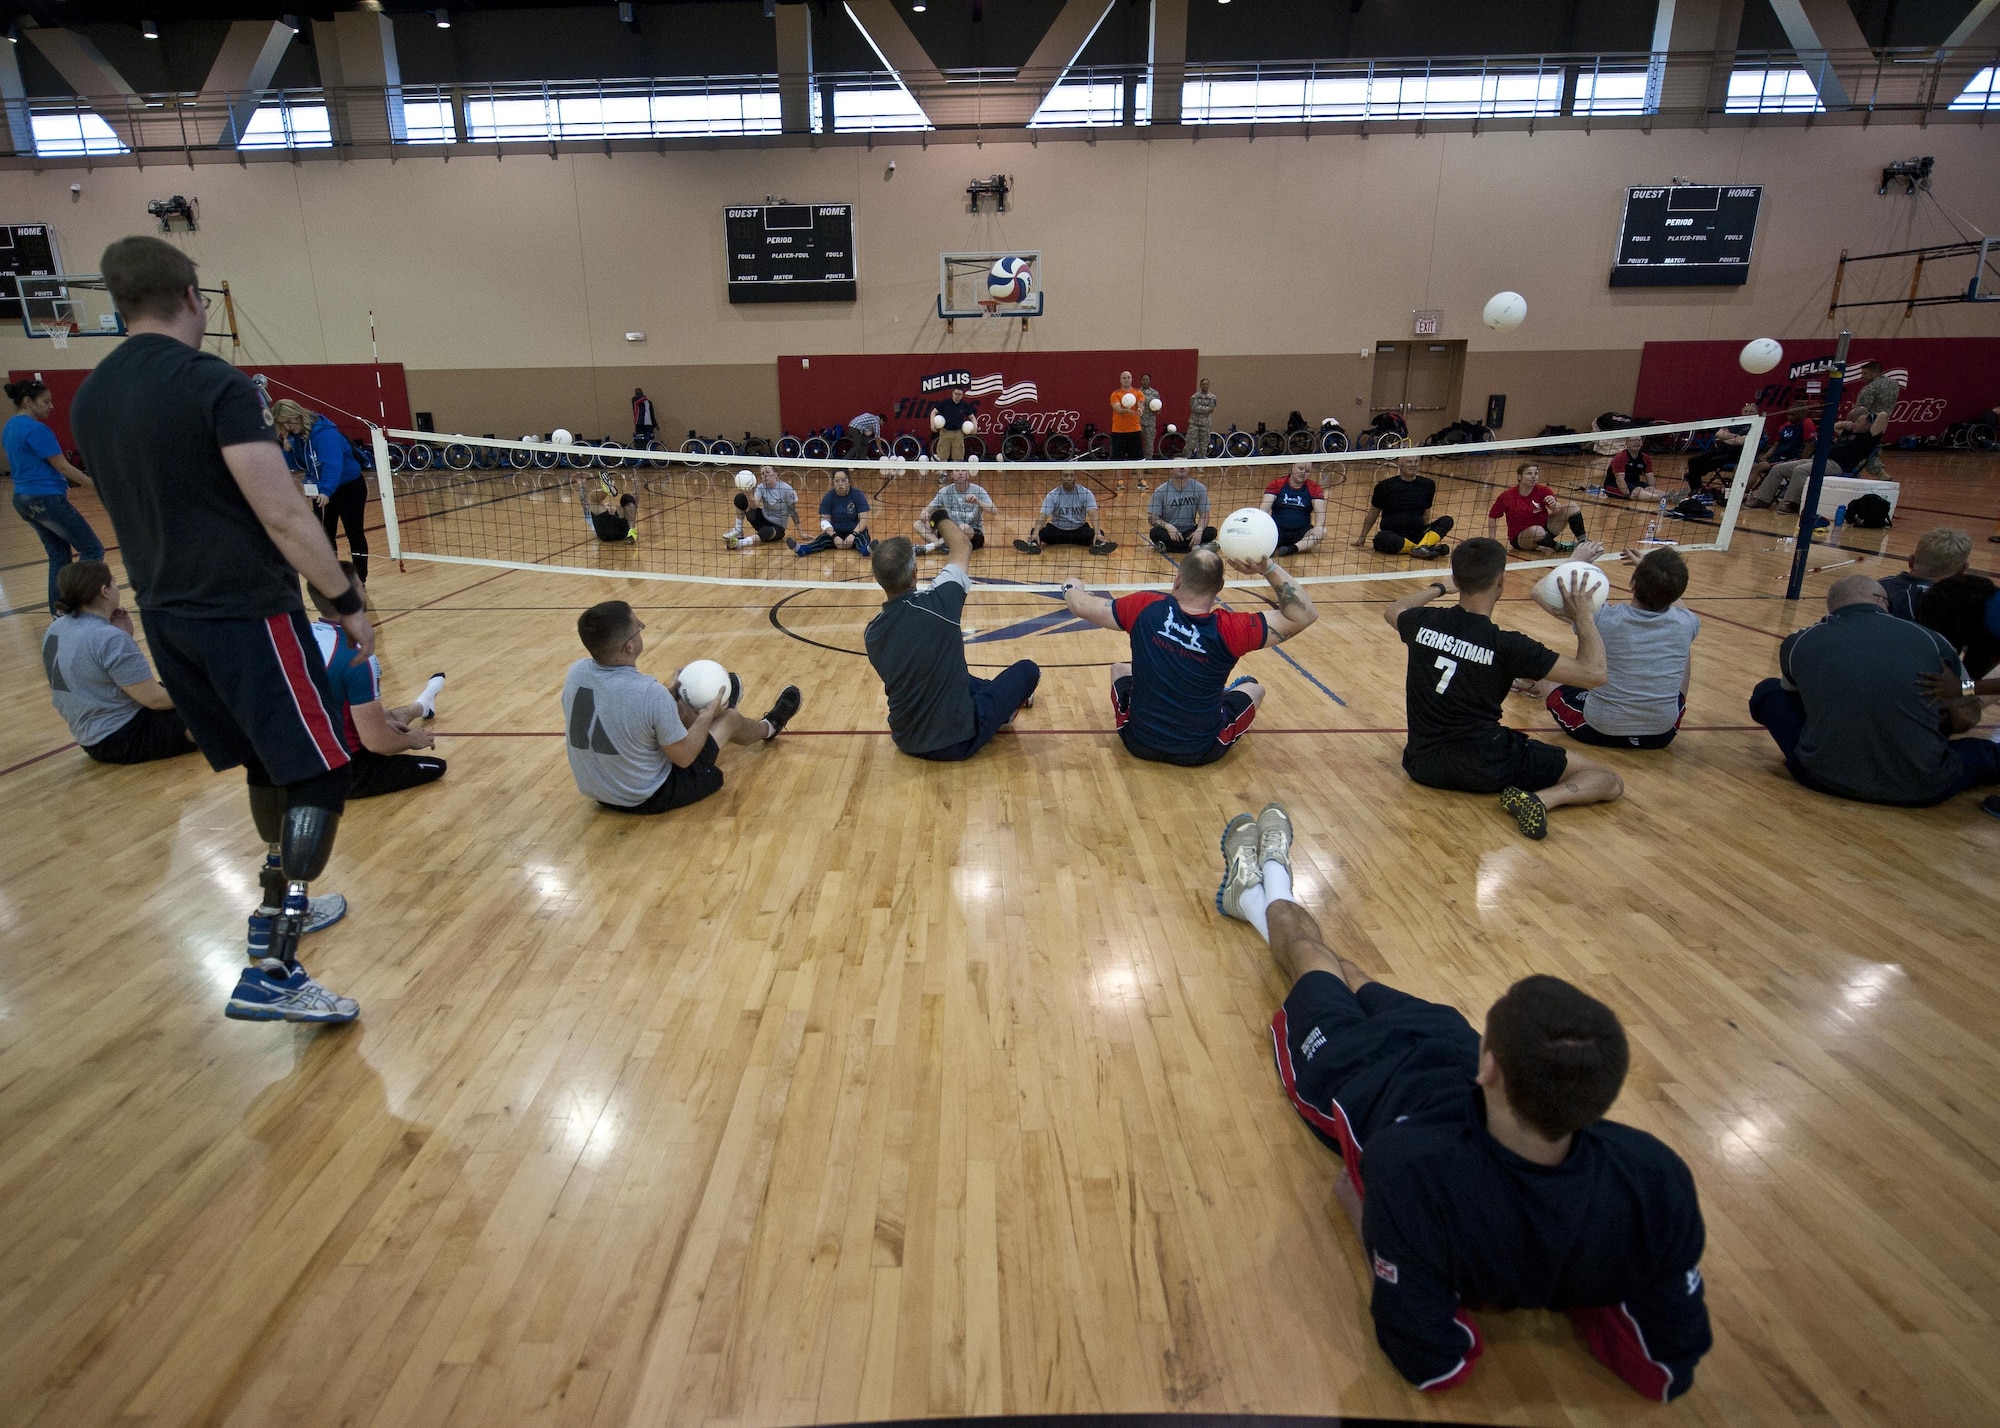 Members of the U.S. Army’s wounded warrior sitting volleyball team practices with members of the British wounded warrior team Feb. 27, 2015, during the 2015 U.S. Air Force Trials at Nellis Air Force Base, Nev. Participants in the trials will compete in wheelchair basketball, wheelchair rugby, sitting volleyball, swimming, track and field, air pistol and rifle shooting, archery and cycling. (U.S. Air Force photo/Staff Sgt. Siuta B. Ika)